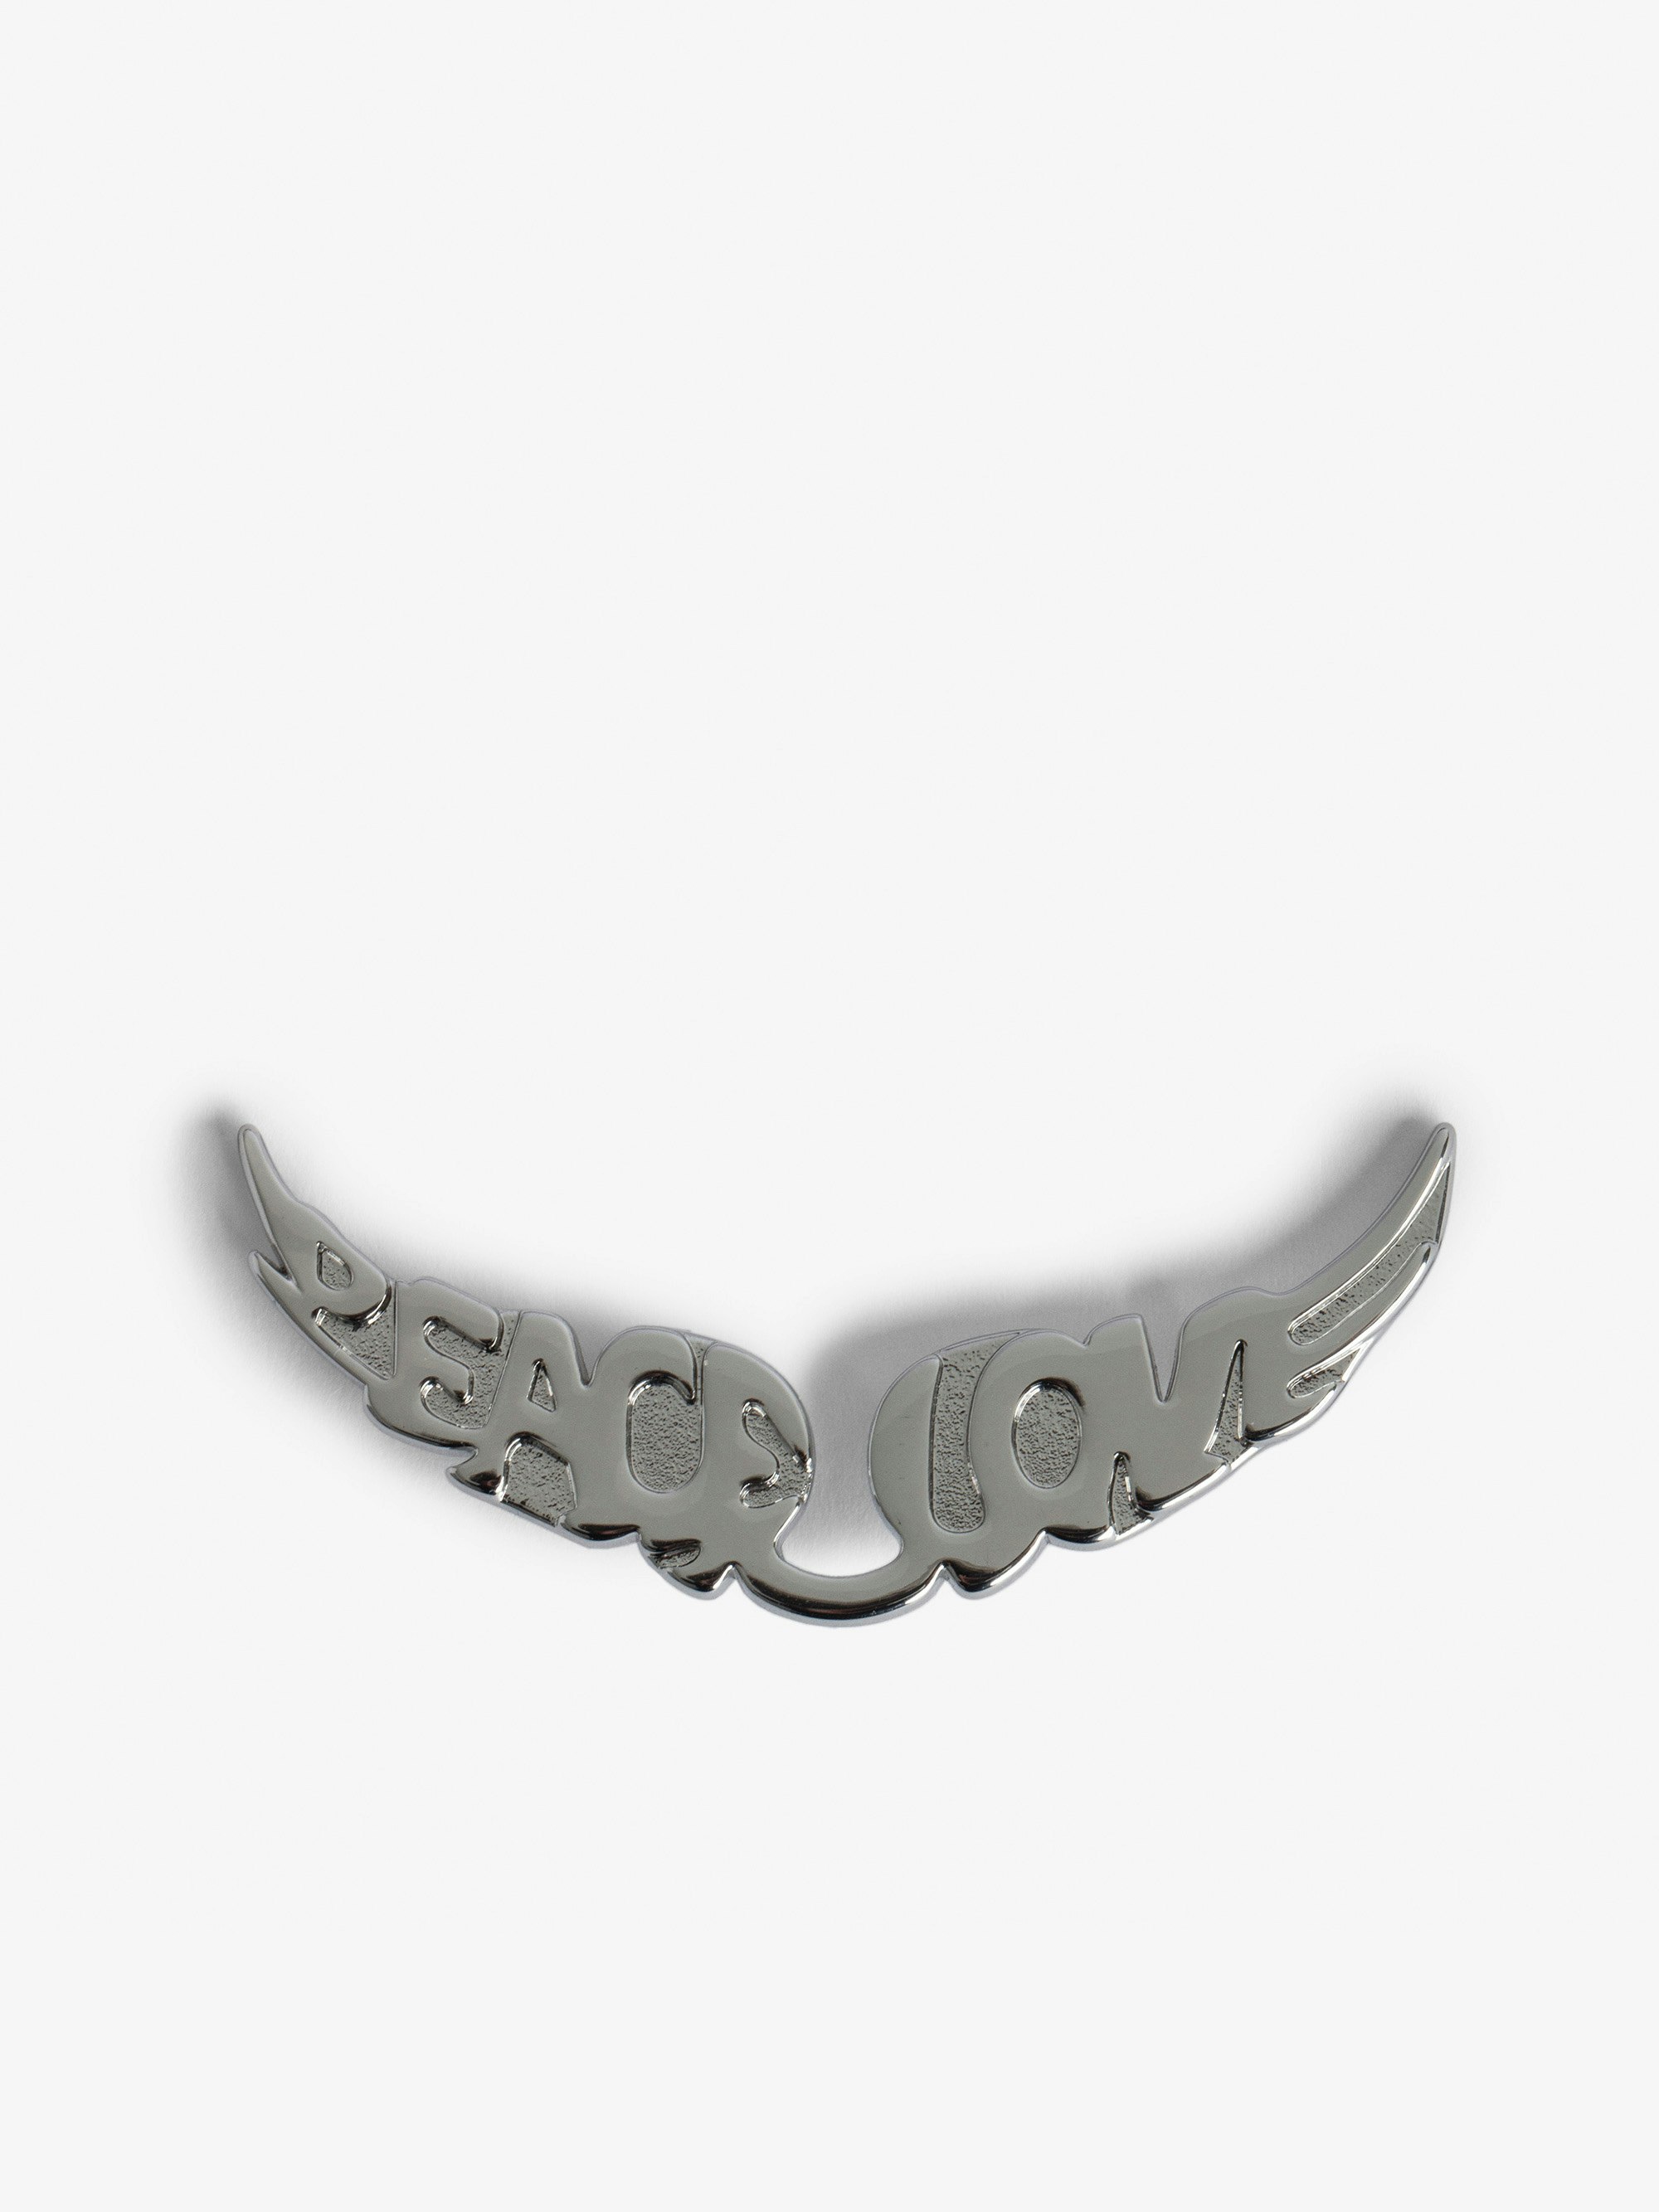 Swing Your Wings Peace Love Charm - Clip-on wings charm. for Rock Swing Your Wings clutch.